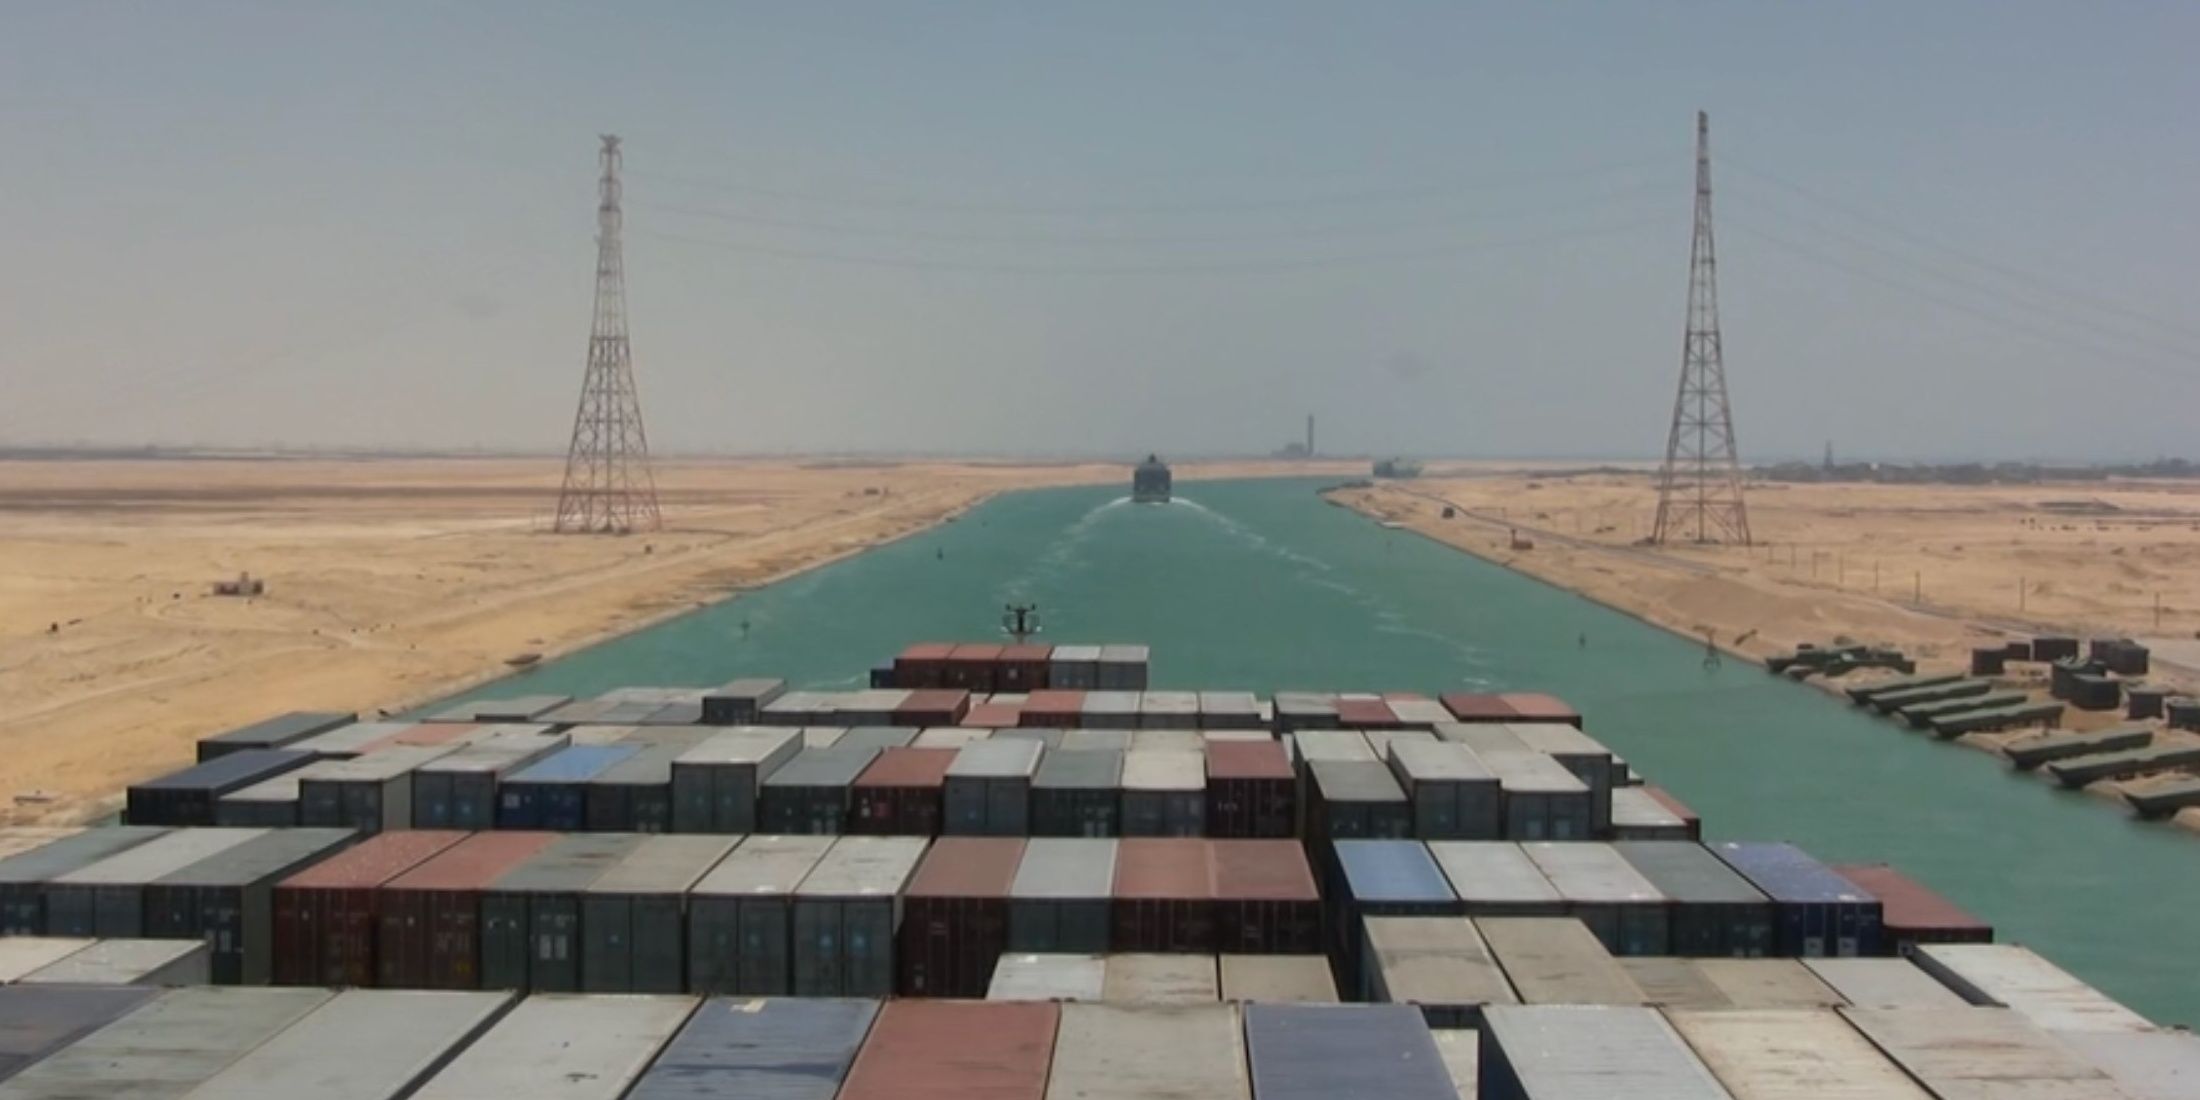 Shipping containers sailing on a river in Logistics